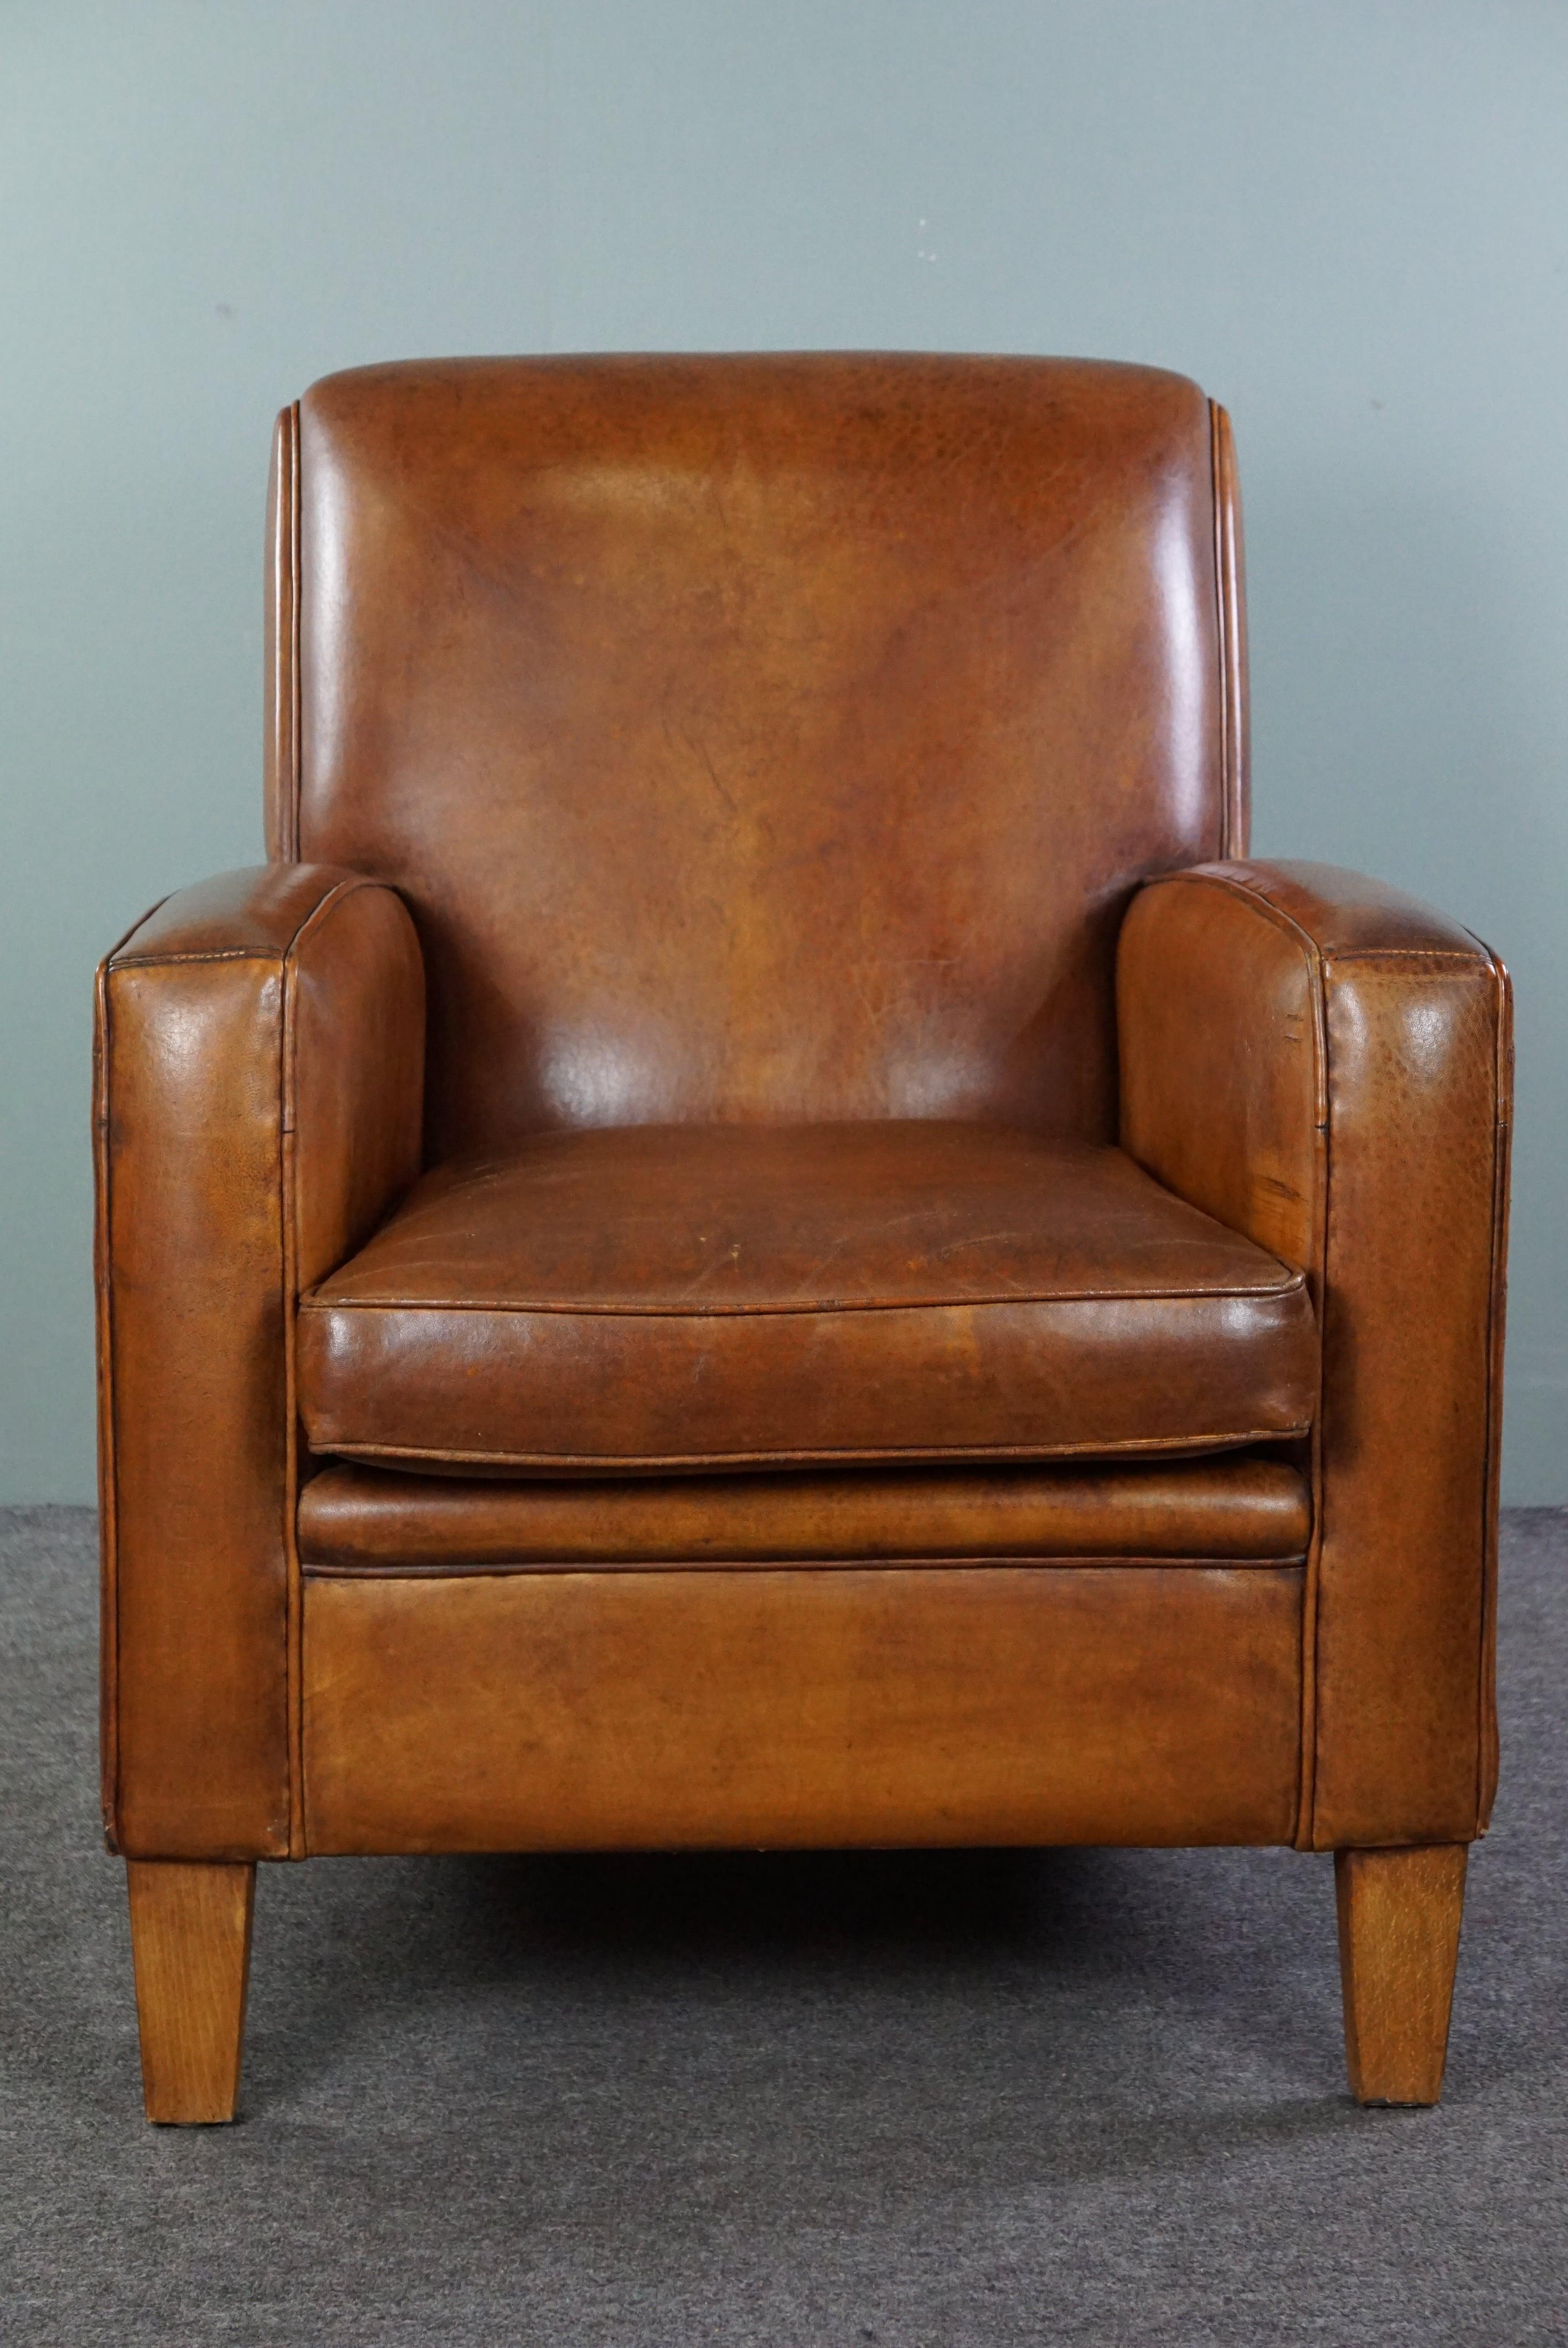 Offered is this well-maintained sheep leather design armchair. Enrich your interior with this beautiful cognac-colored armchair made of sheep leather. The armchair is in good condition and not only offers comfort but also adds stylish elegance to